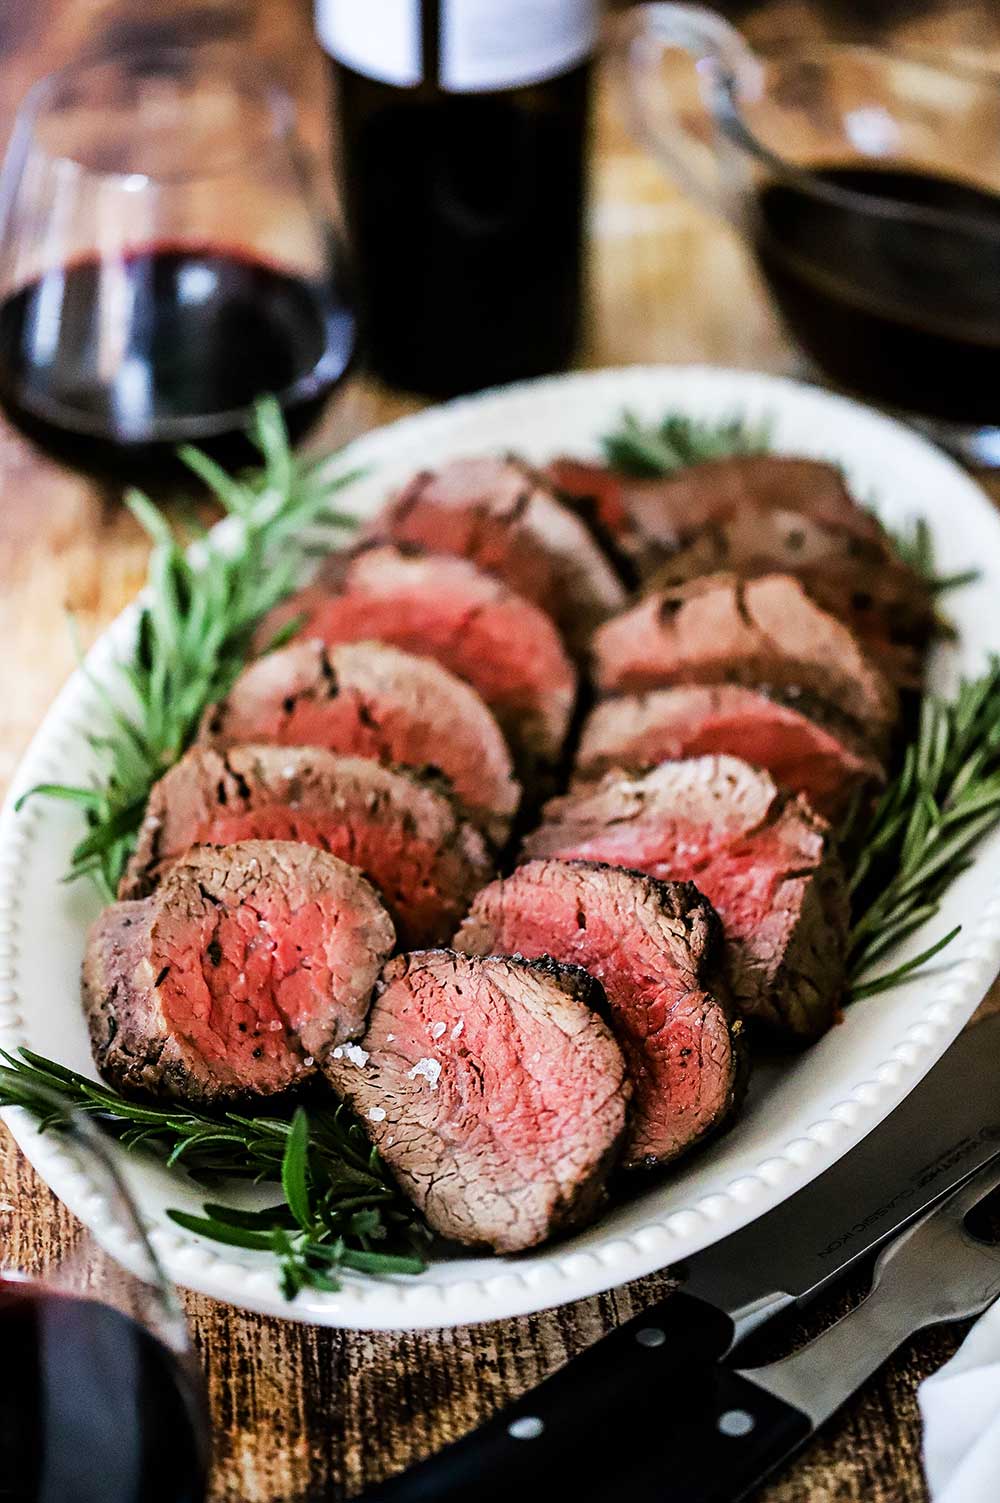 An oval white platter filled with slices of beef tenderloin with sprigs of rosemary along the edge and a glass or red wine sitting in the rear.